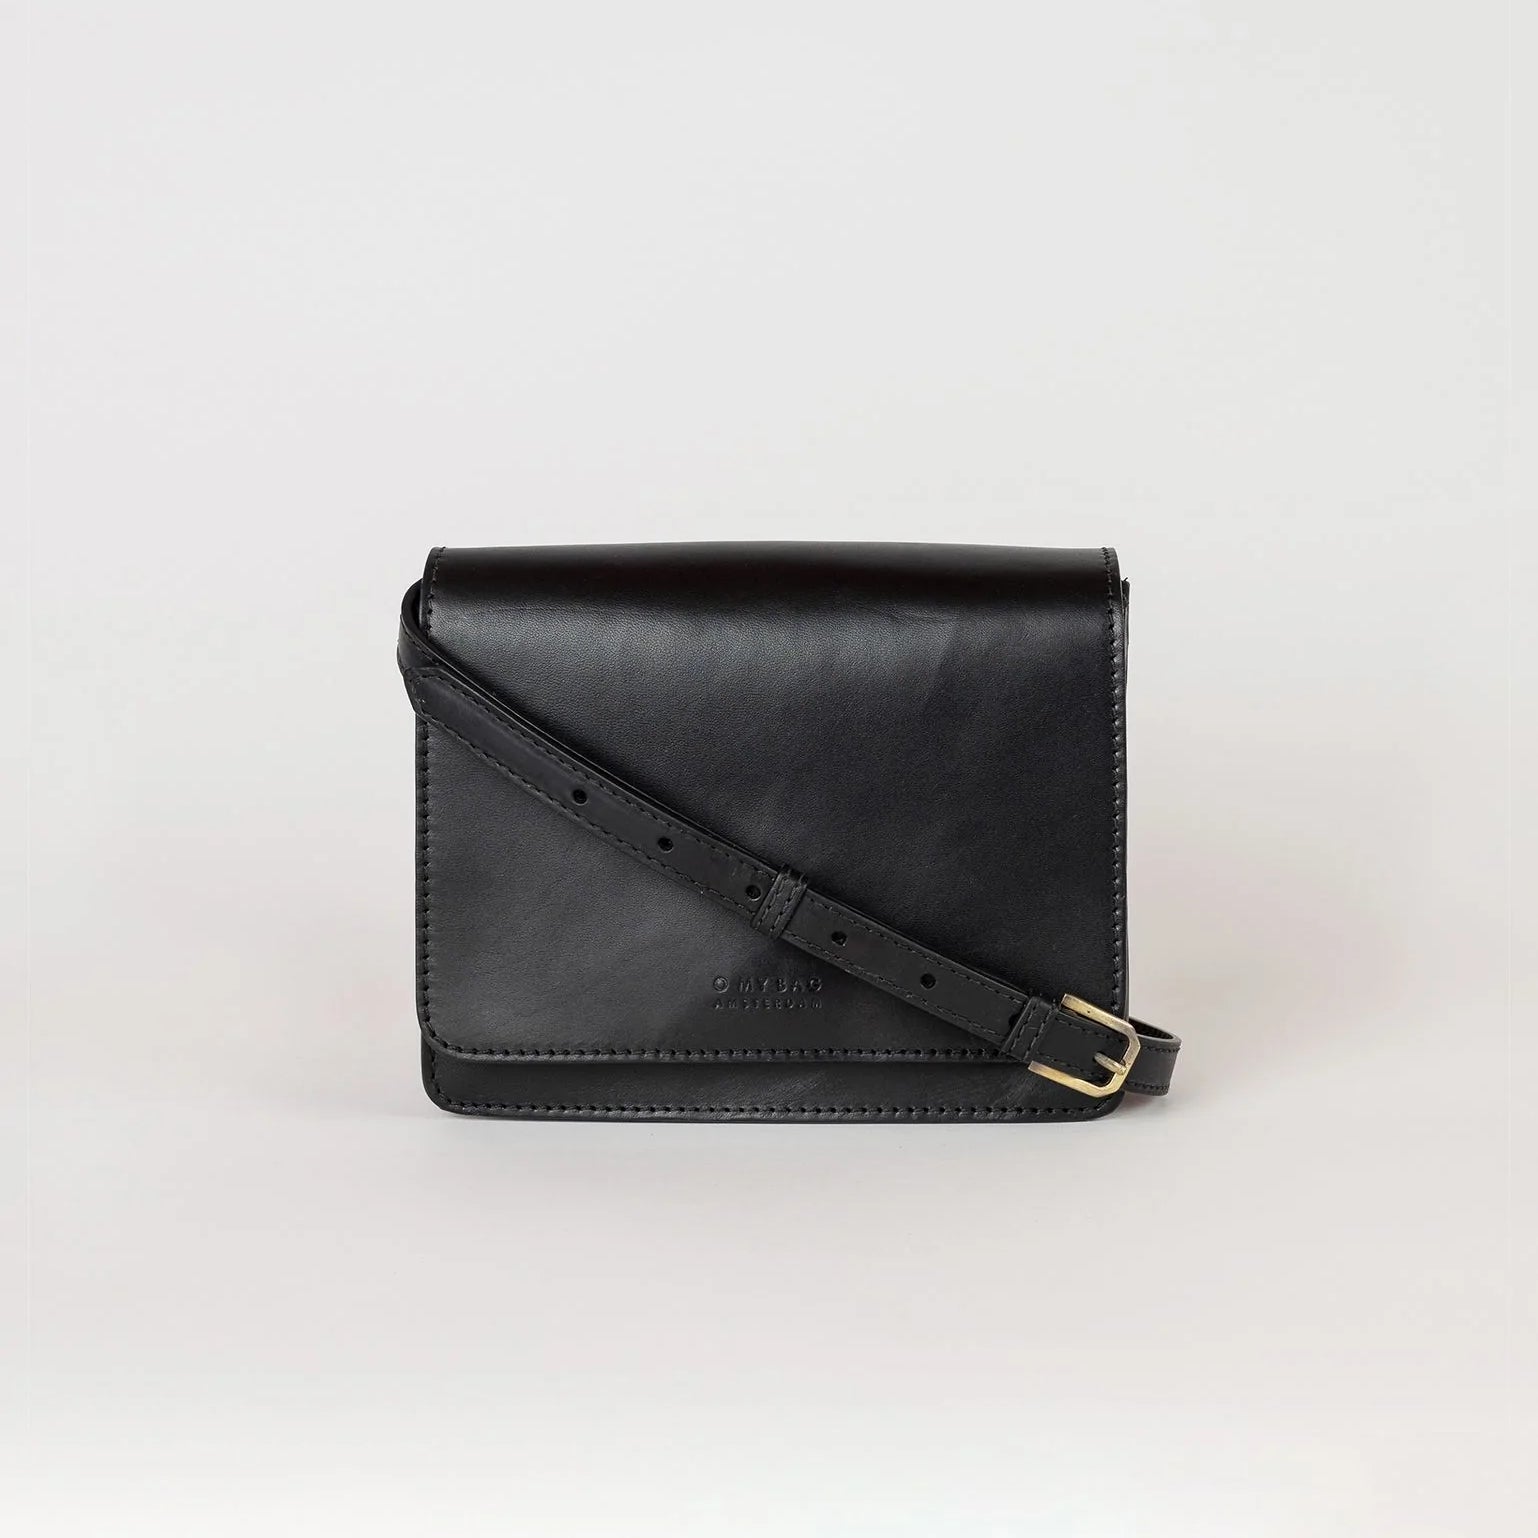 Audrey Mini Black Classic Leather (Checkered Webbing/Leather Strap)